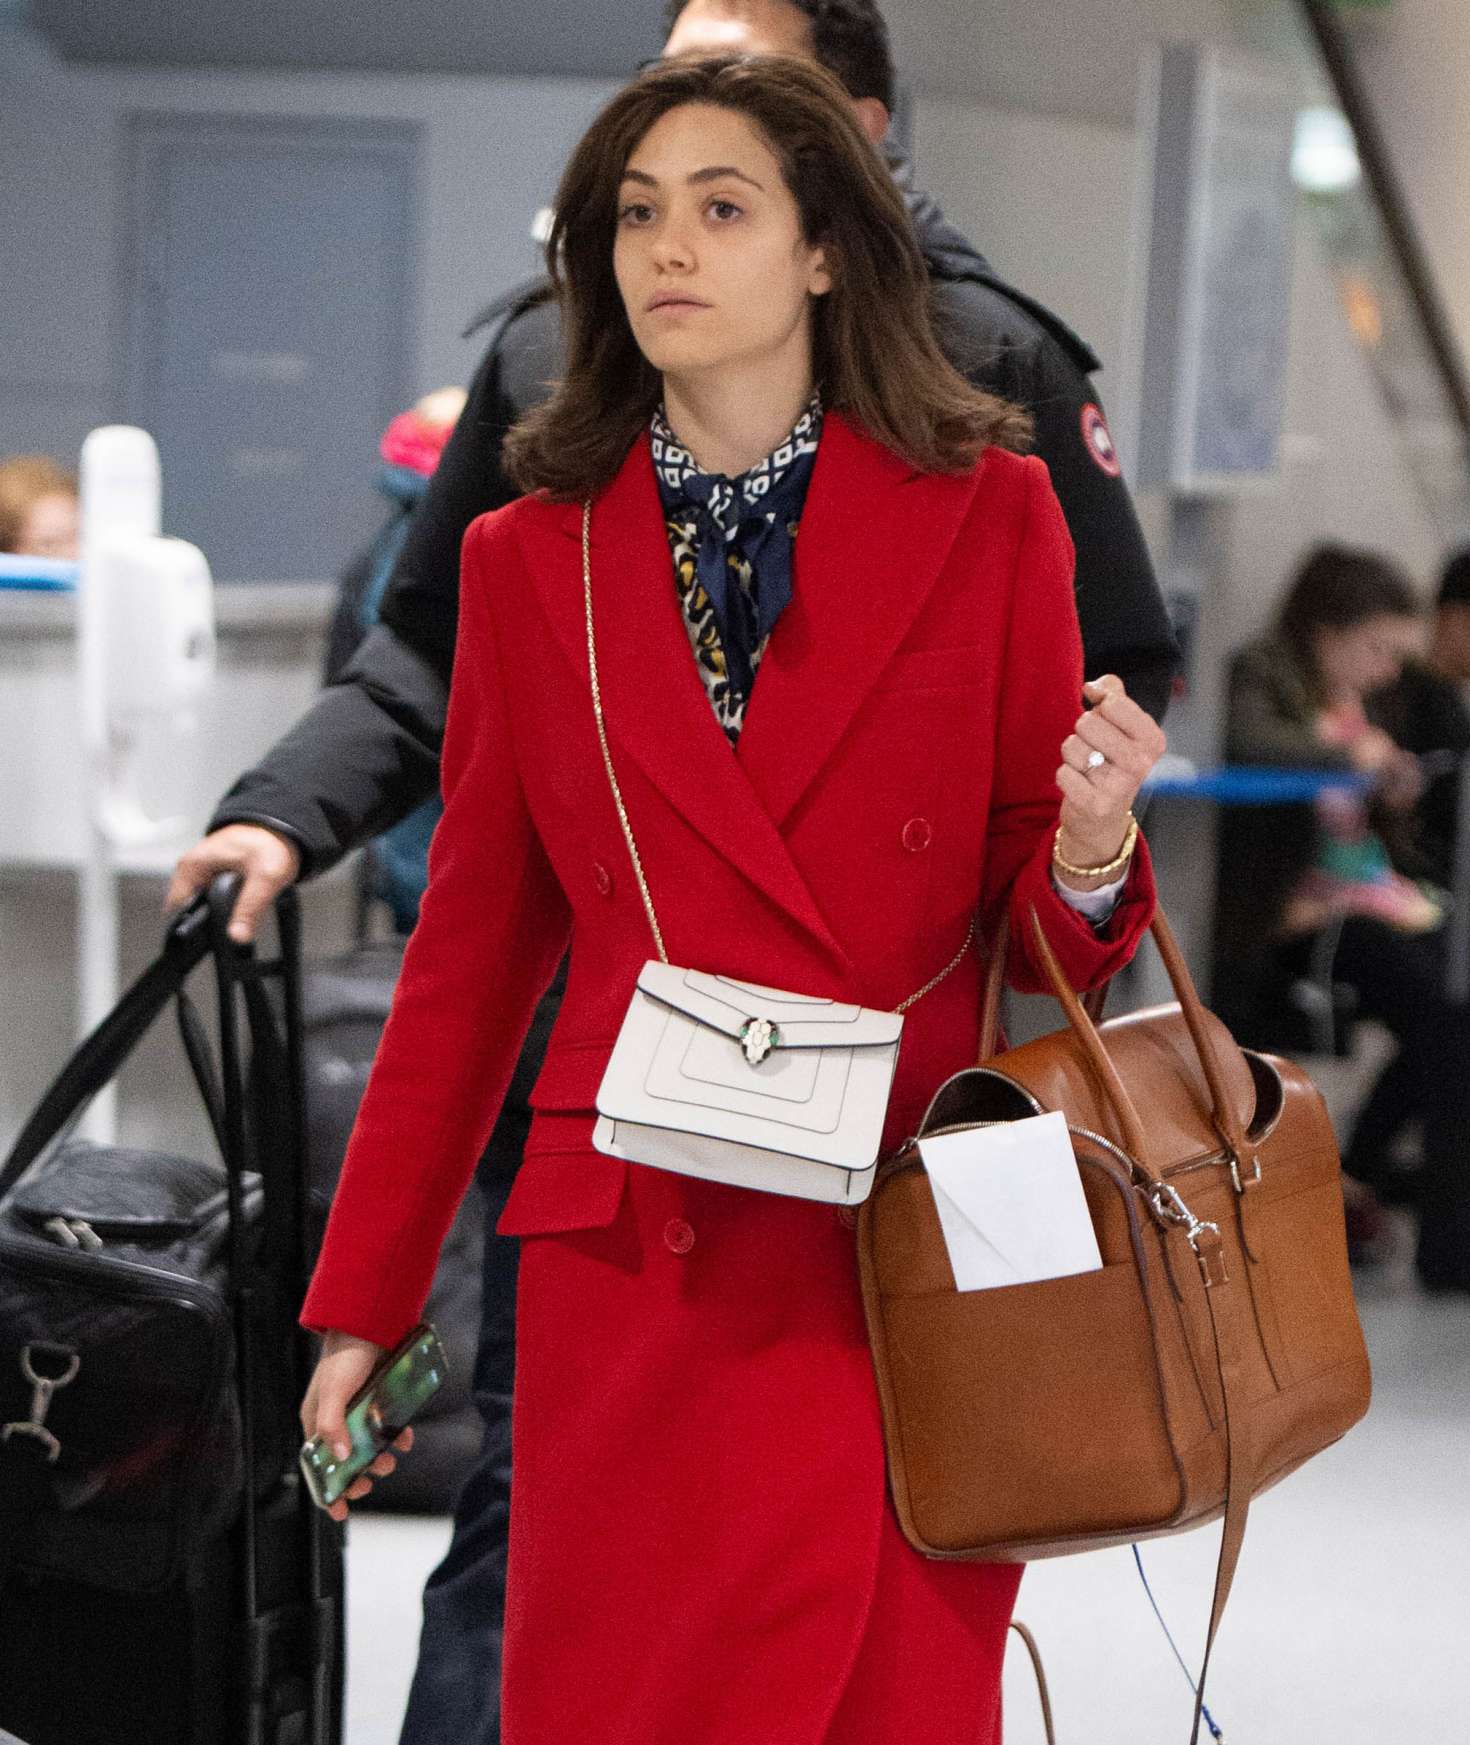 Emmy Rossum with husband Sam Esmail â€“ Arrives at JFK Airport in NYC